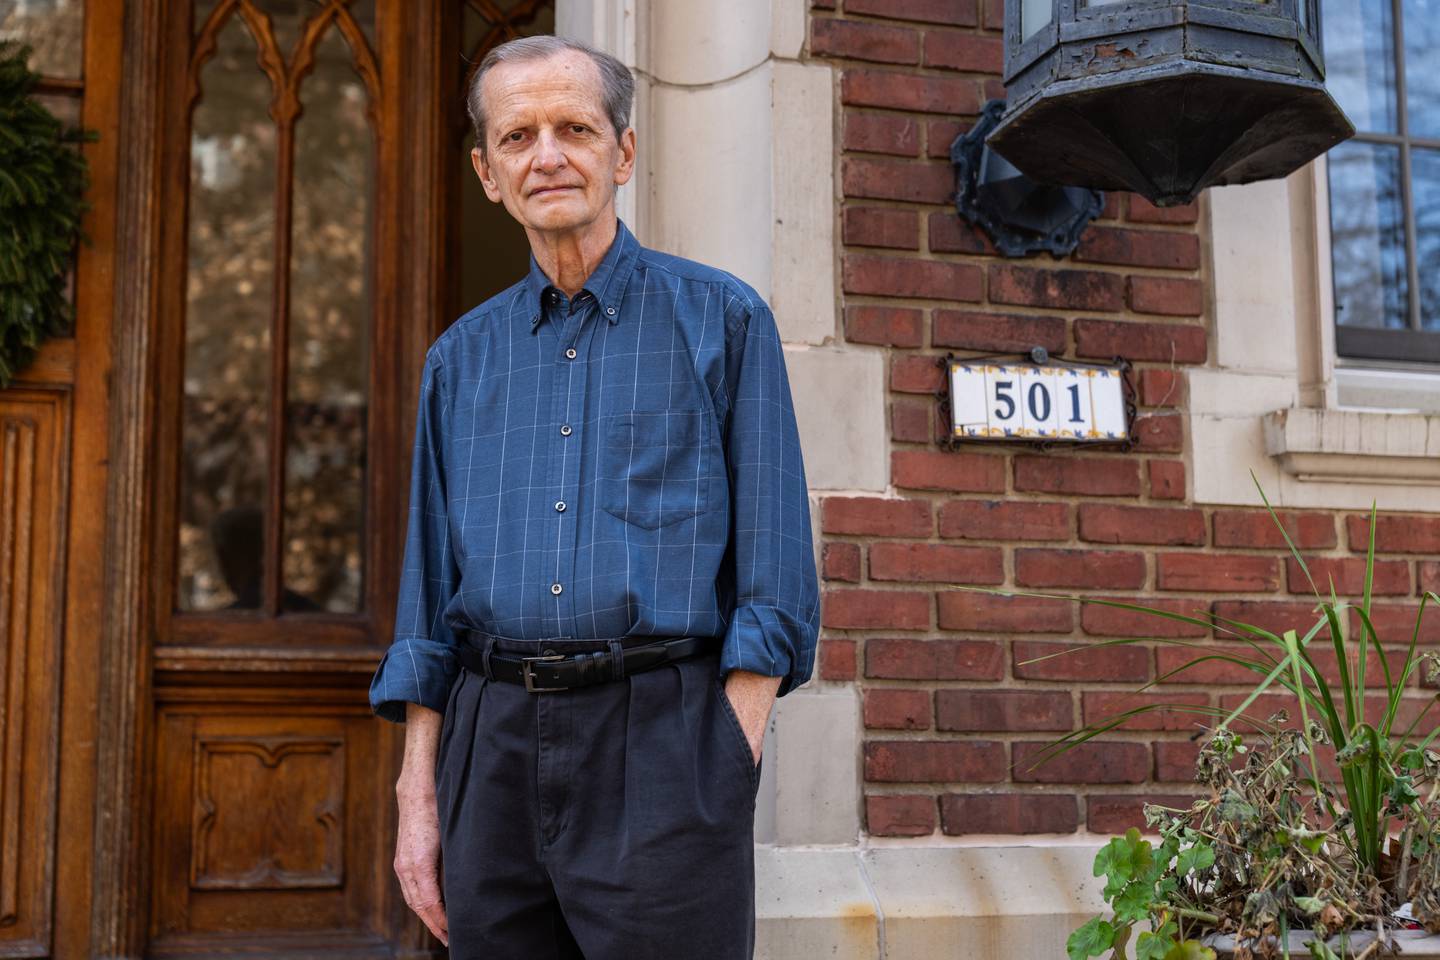 Richard Oloizia poses for a portrait, left hand in his pocket, in front of the brick front entrance of Tudor Arms Apartments.